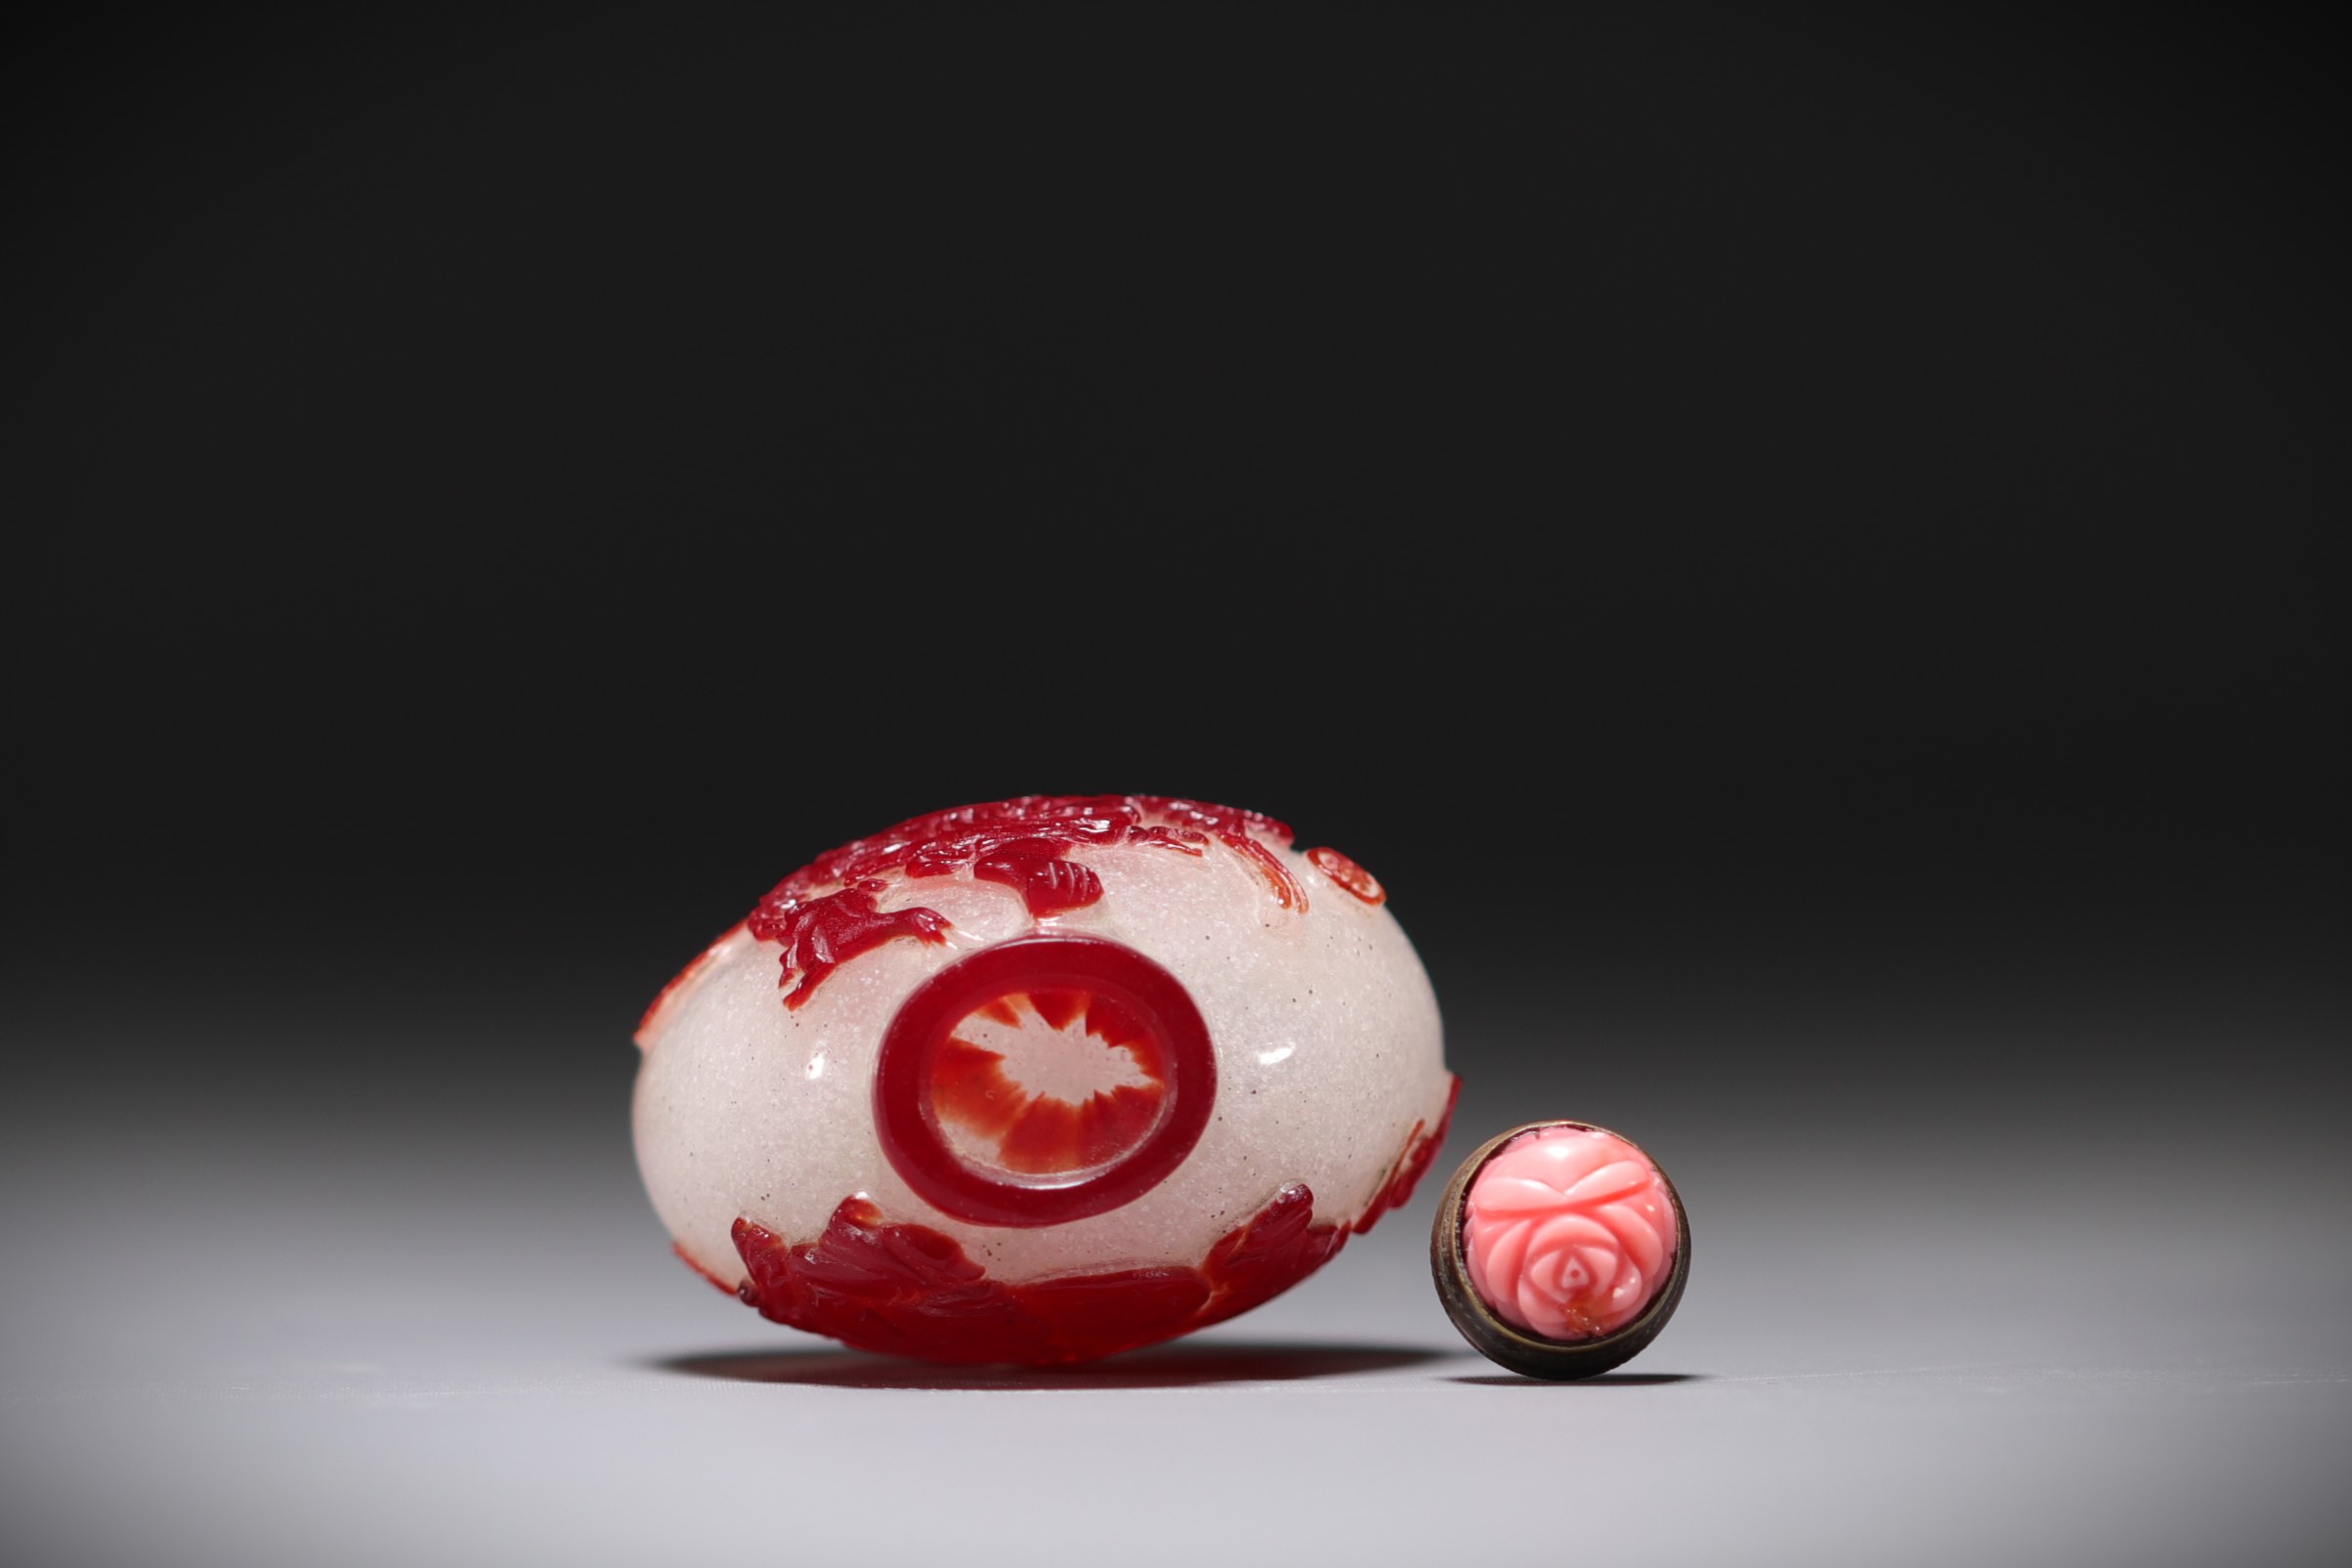 China - Multilayered glass snuffbox decorated with playful characters and bats, carved coral stopper - Image 4 of 4